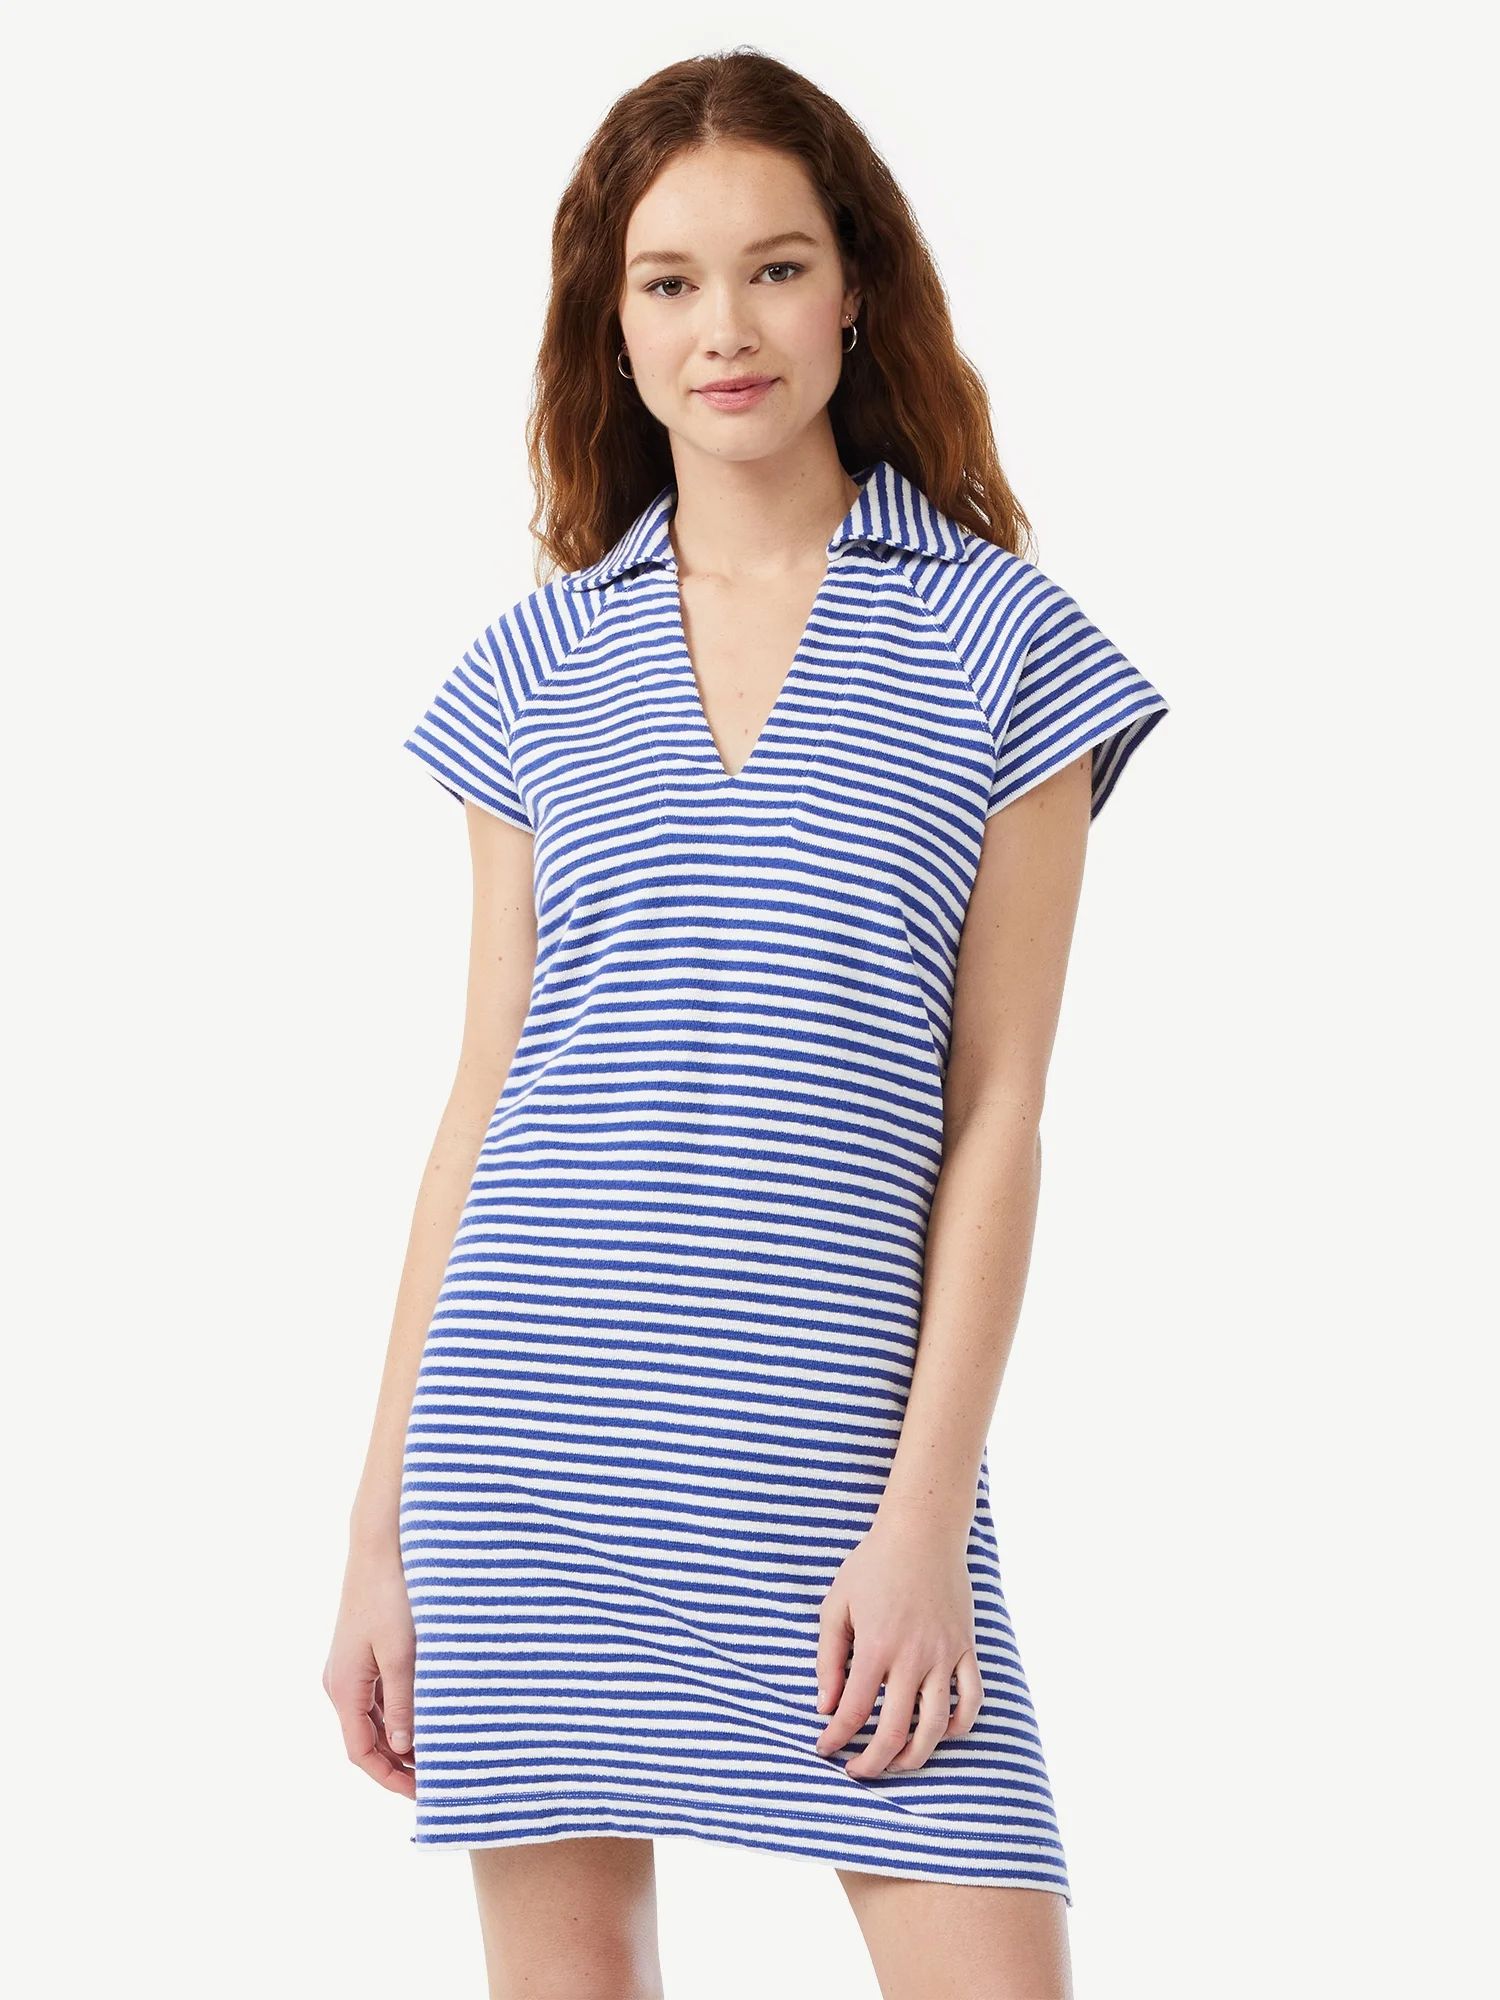 Free Assembly Women's Polo Dress with Short Raglan Sleeves | Walmart (US)